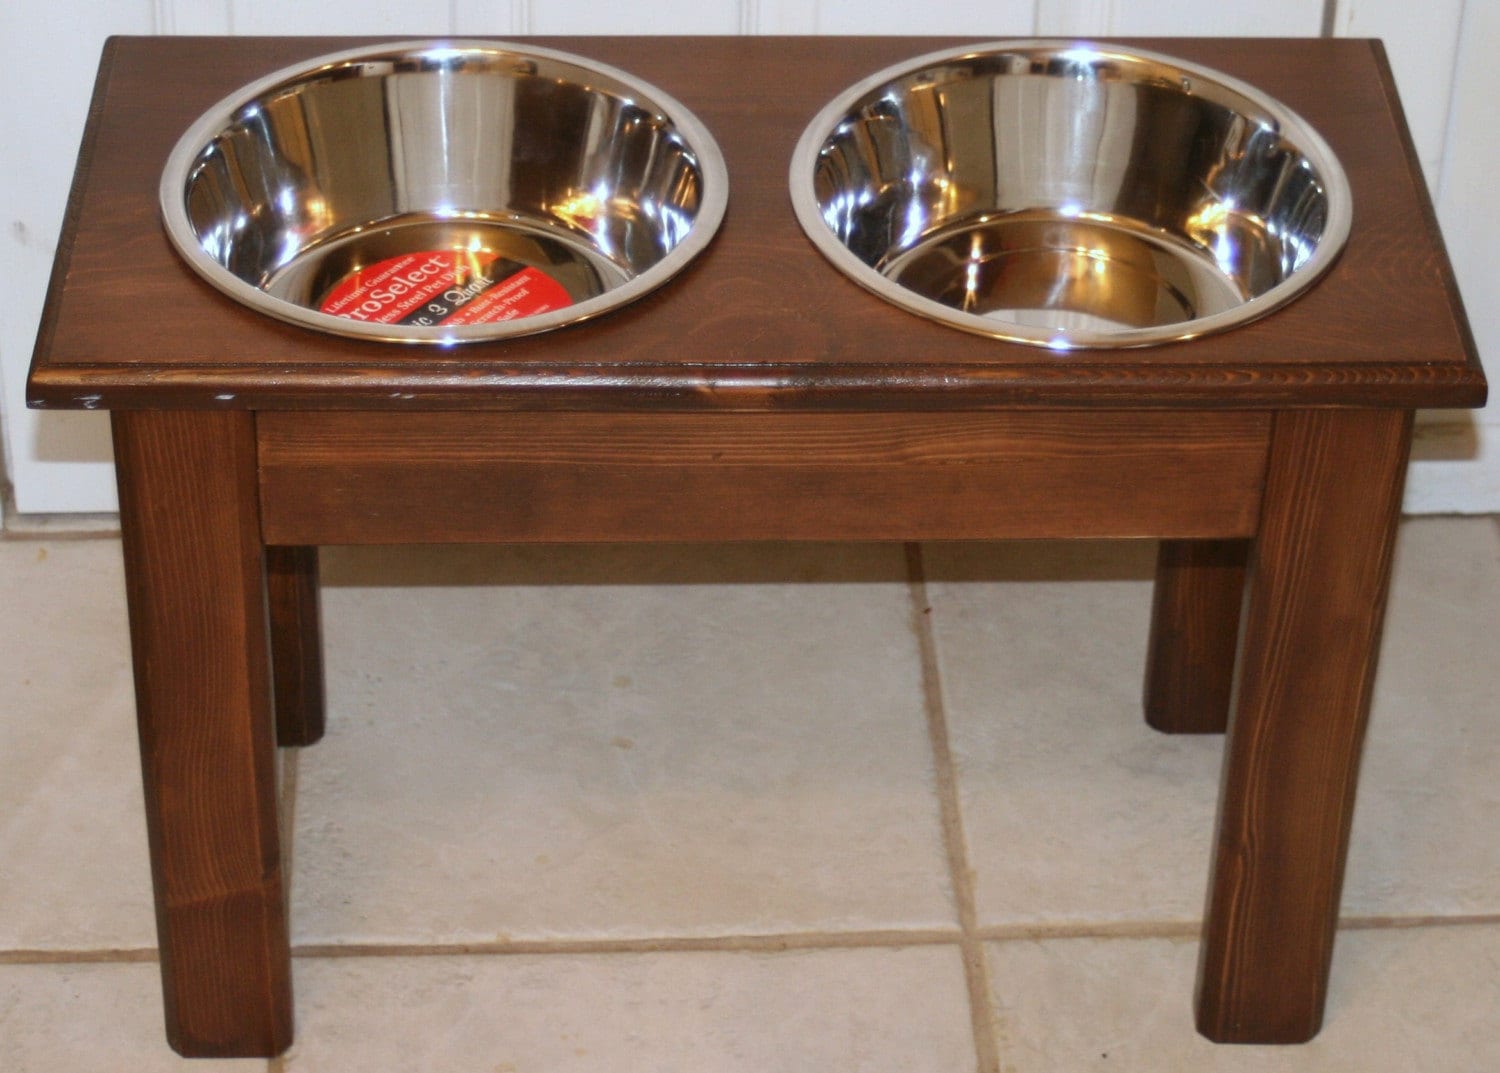 Raised Elevated Dog Food Dish Bowl Large Stand New feeder